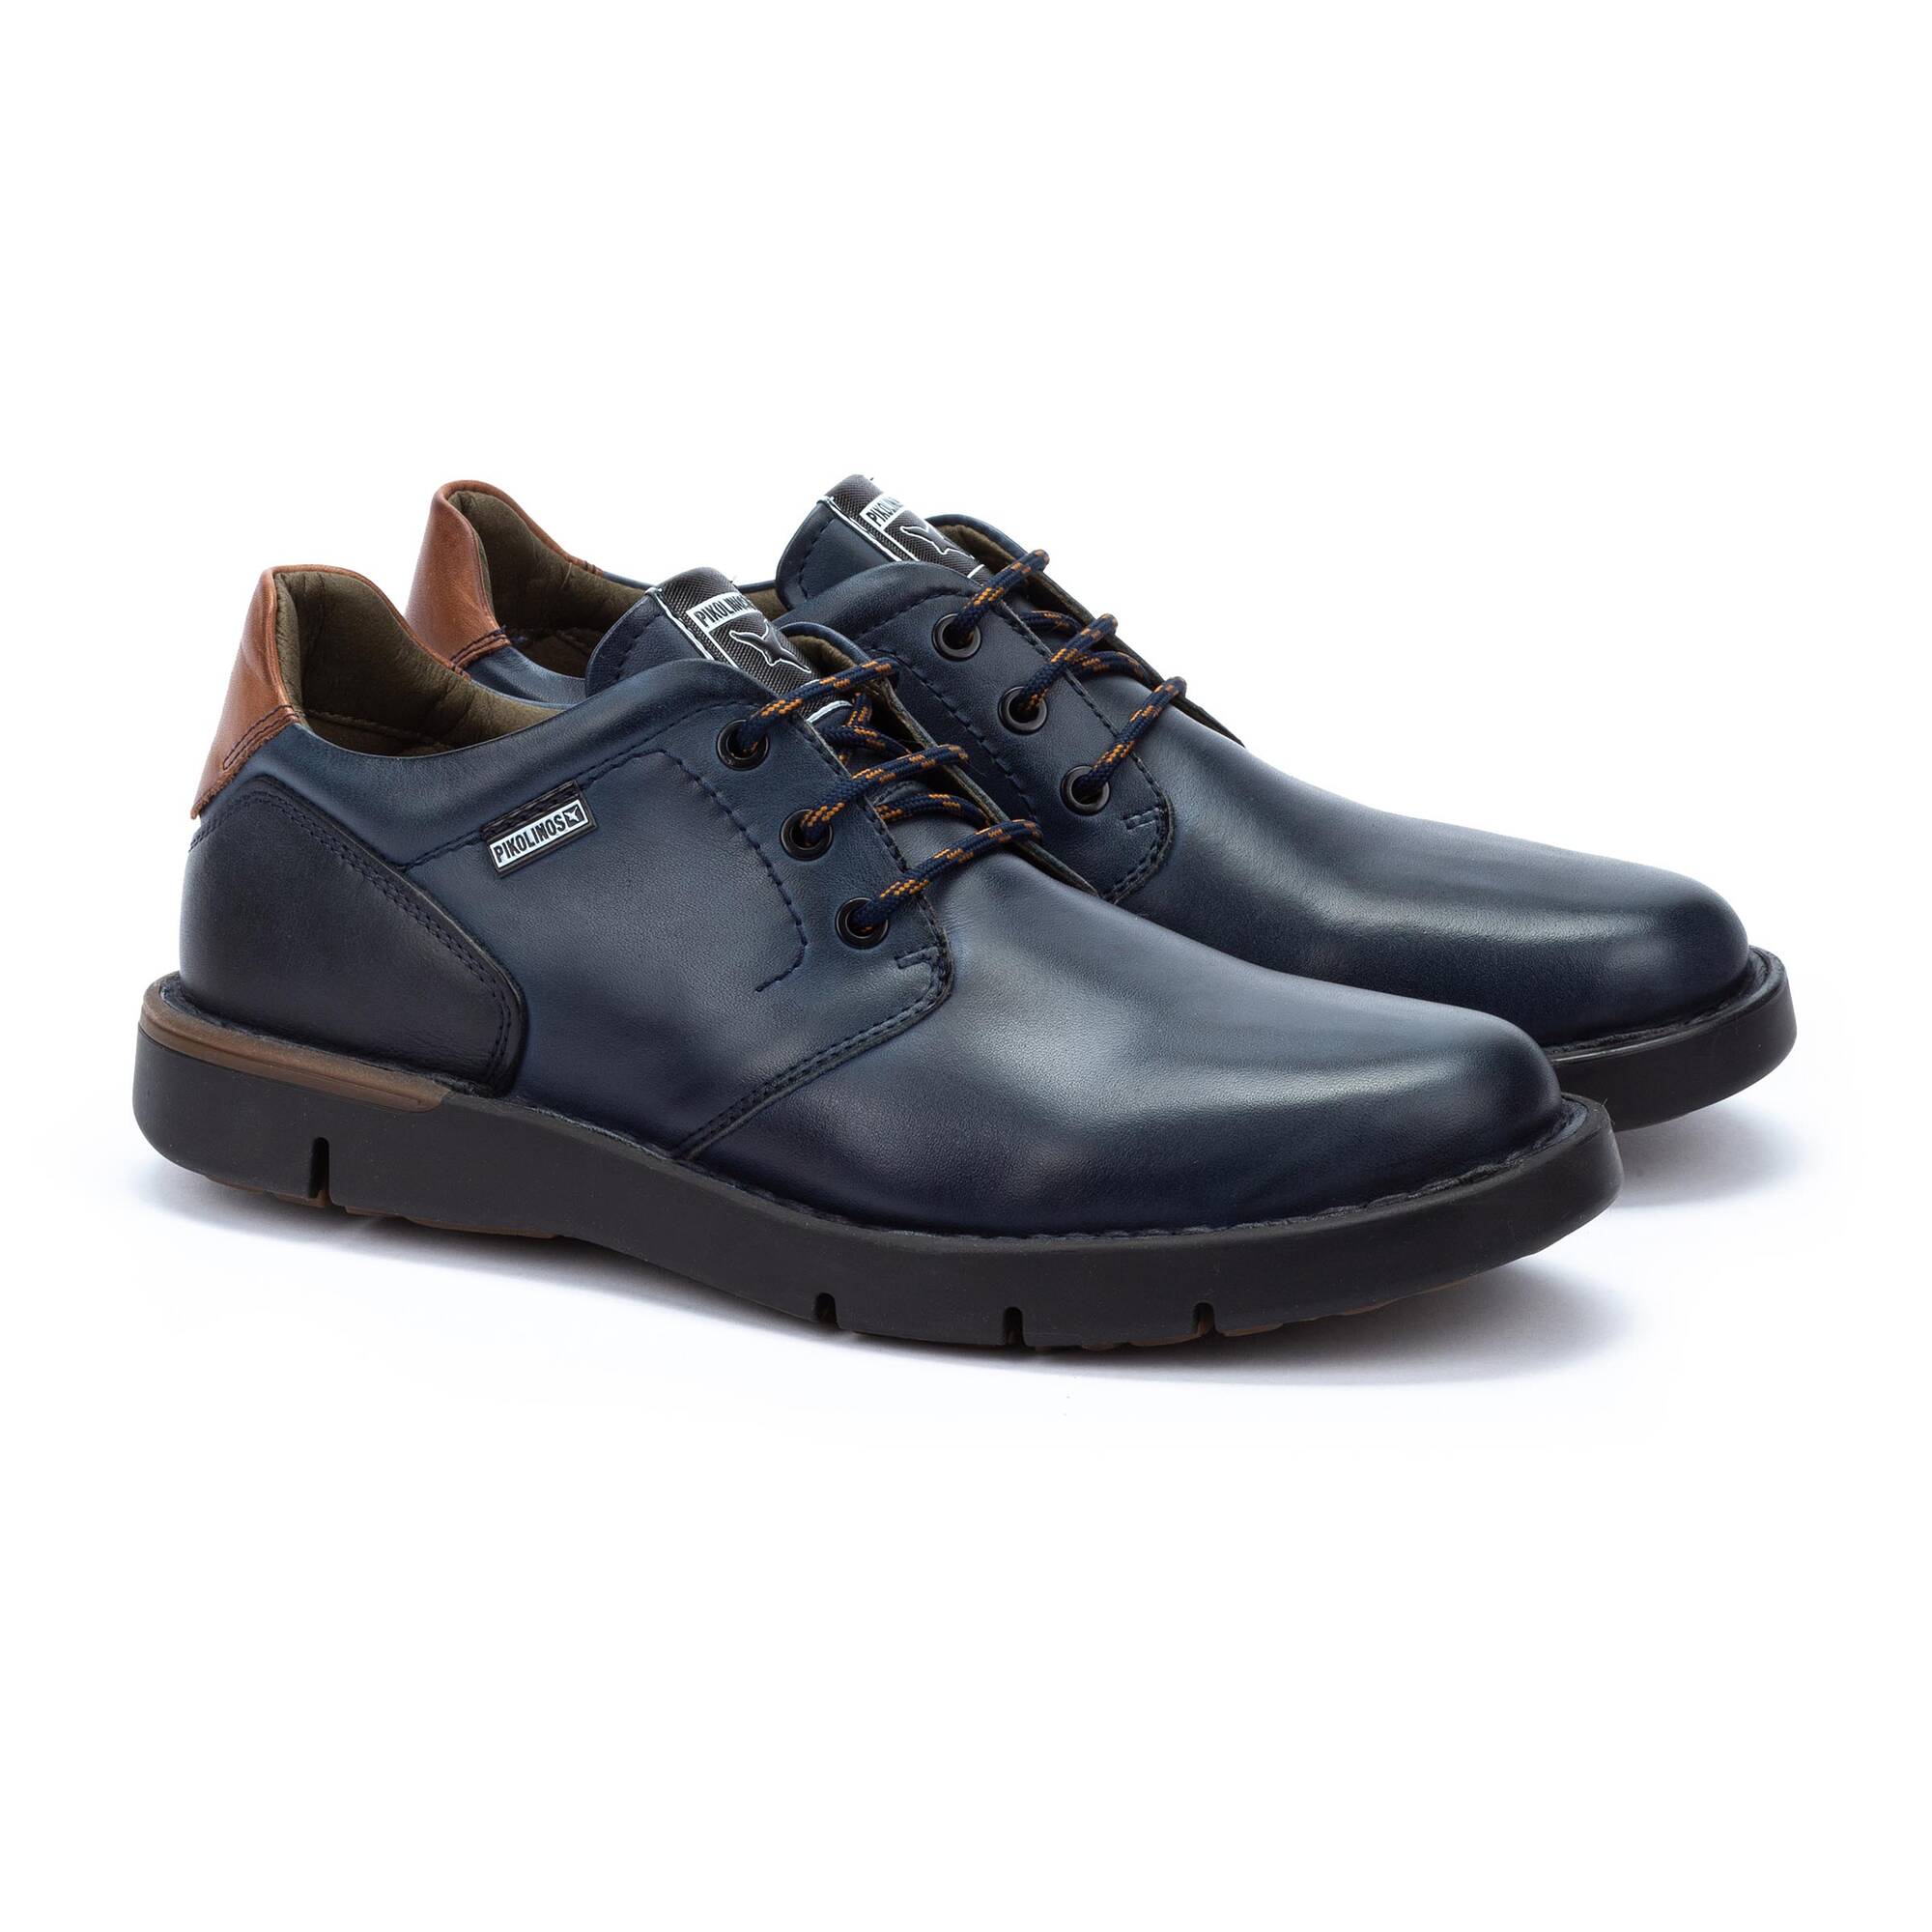 Smart shoes | TOLOSA M7N-4155C1, BLUE, large image number 20 | null